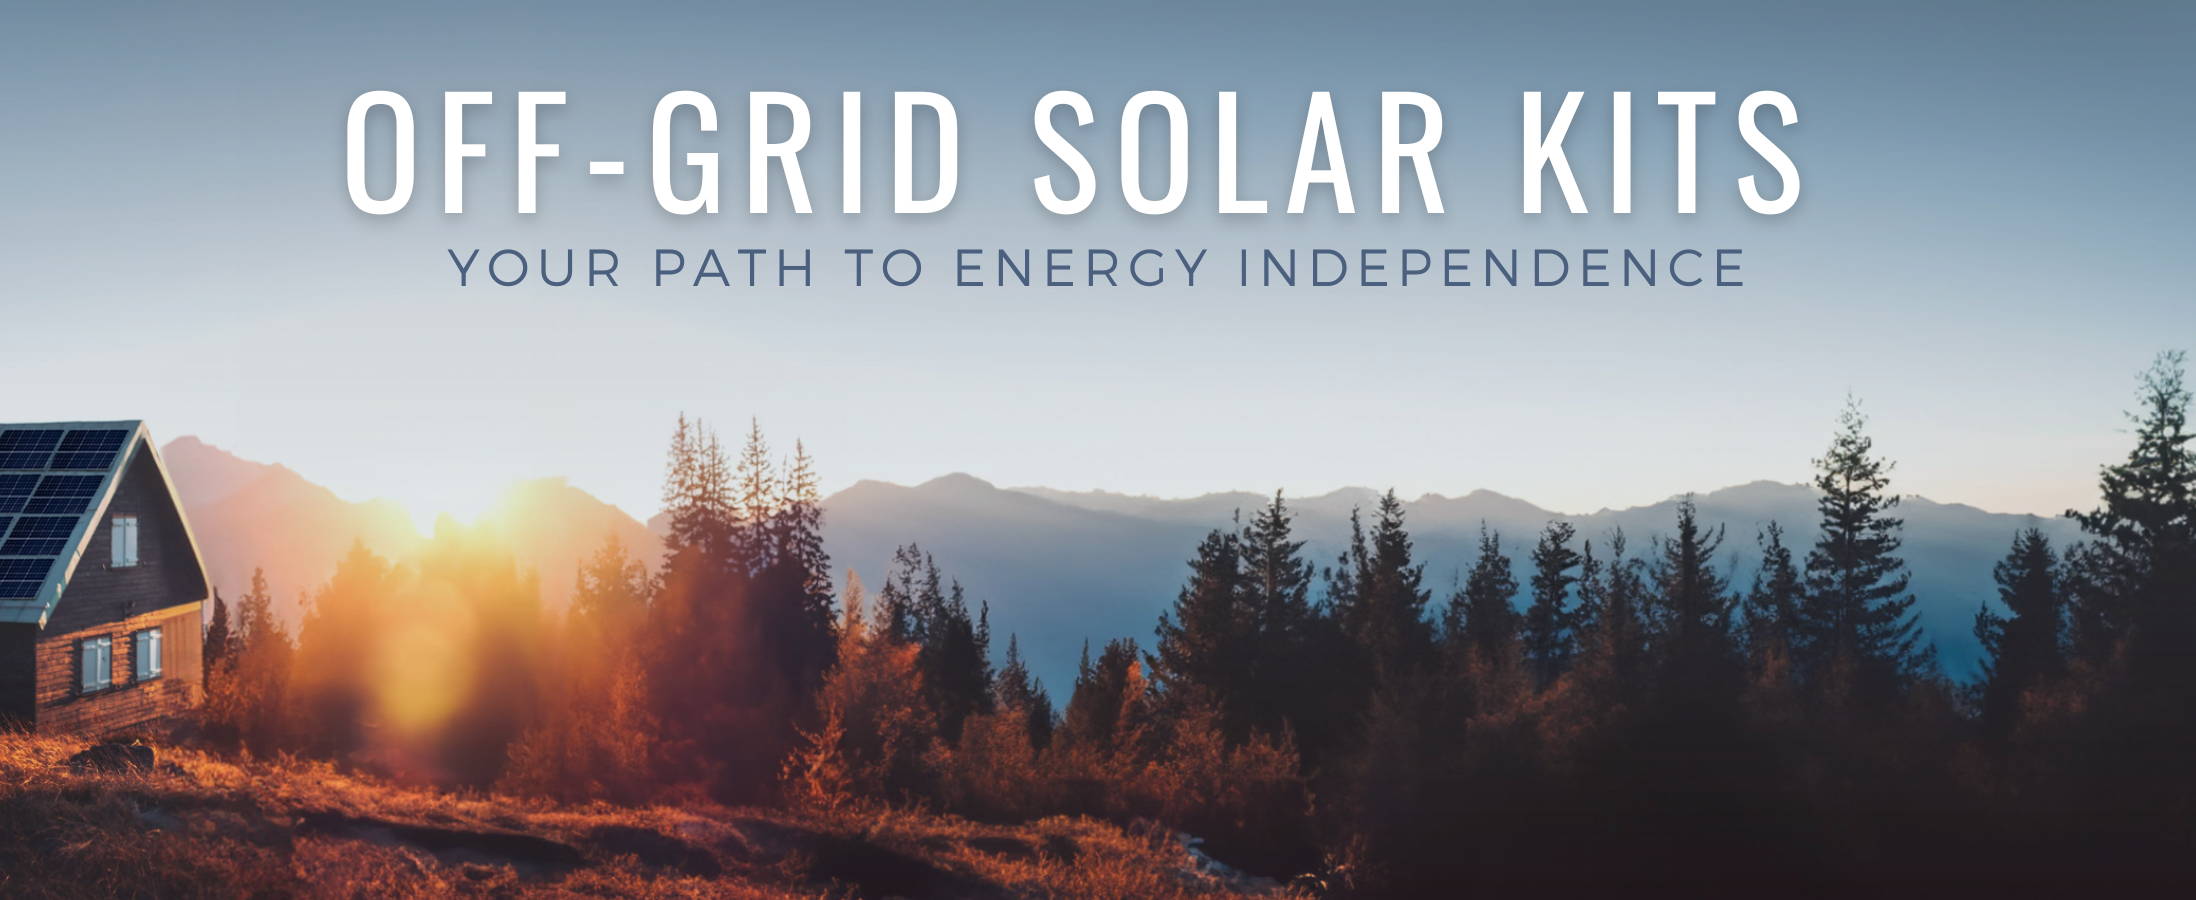 Off-Grid Solar Kits, Your Path to Energy Independence